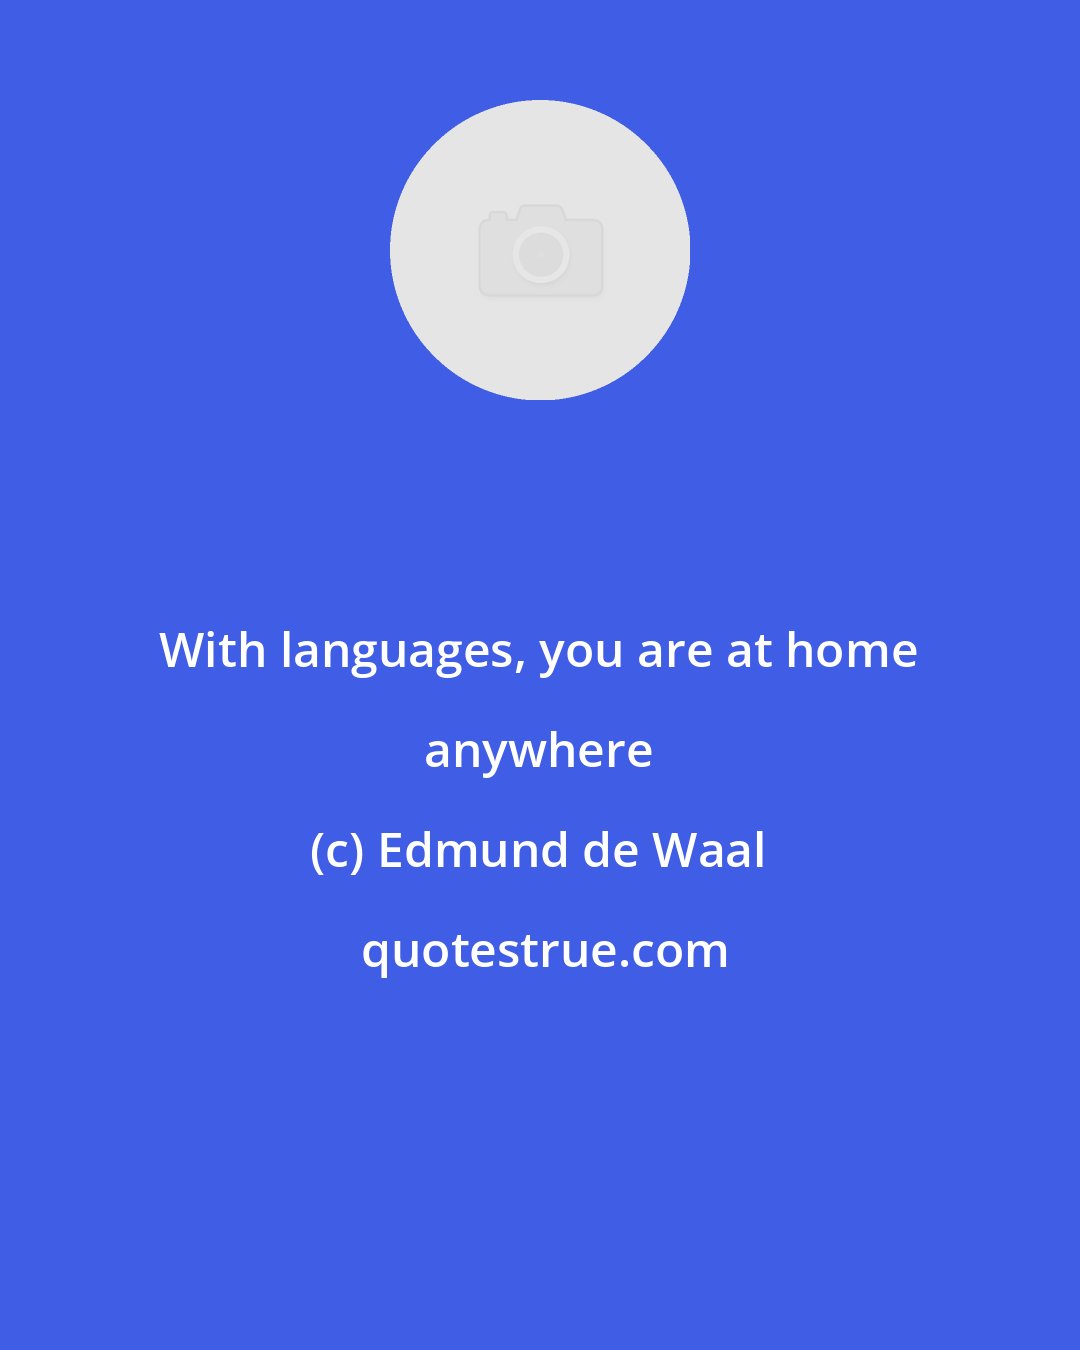 Edmund de Waal: With languages, you are at home anywhere